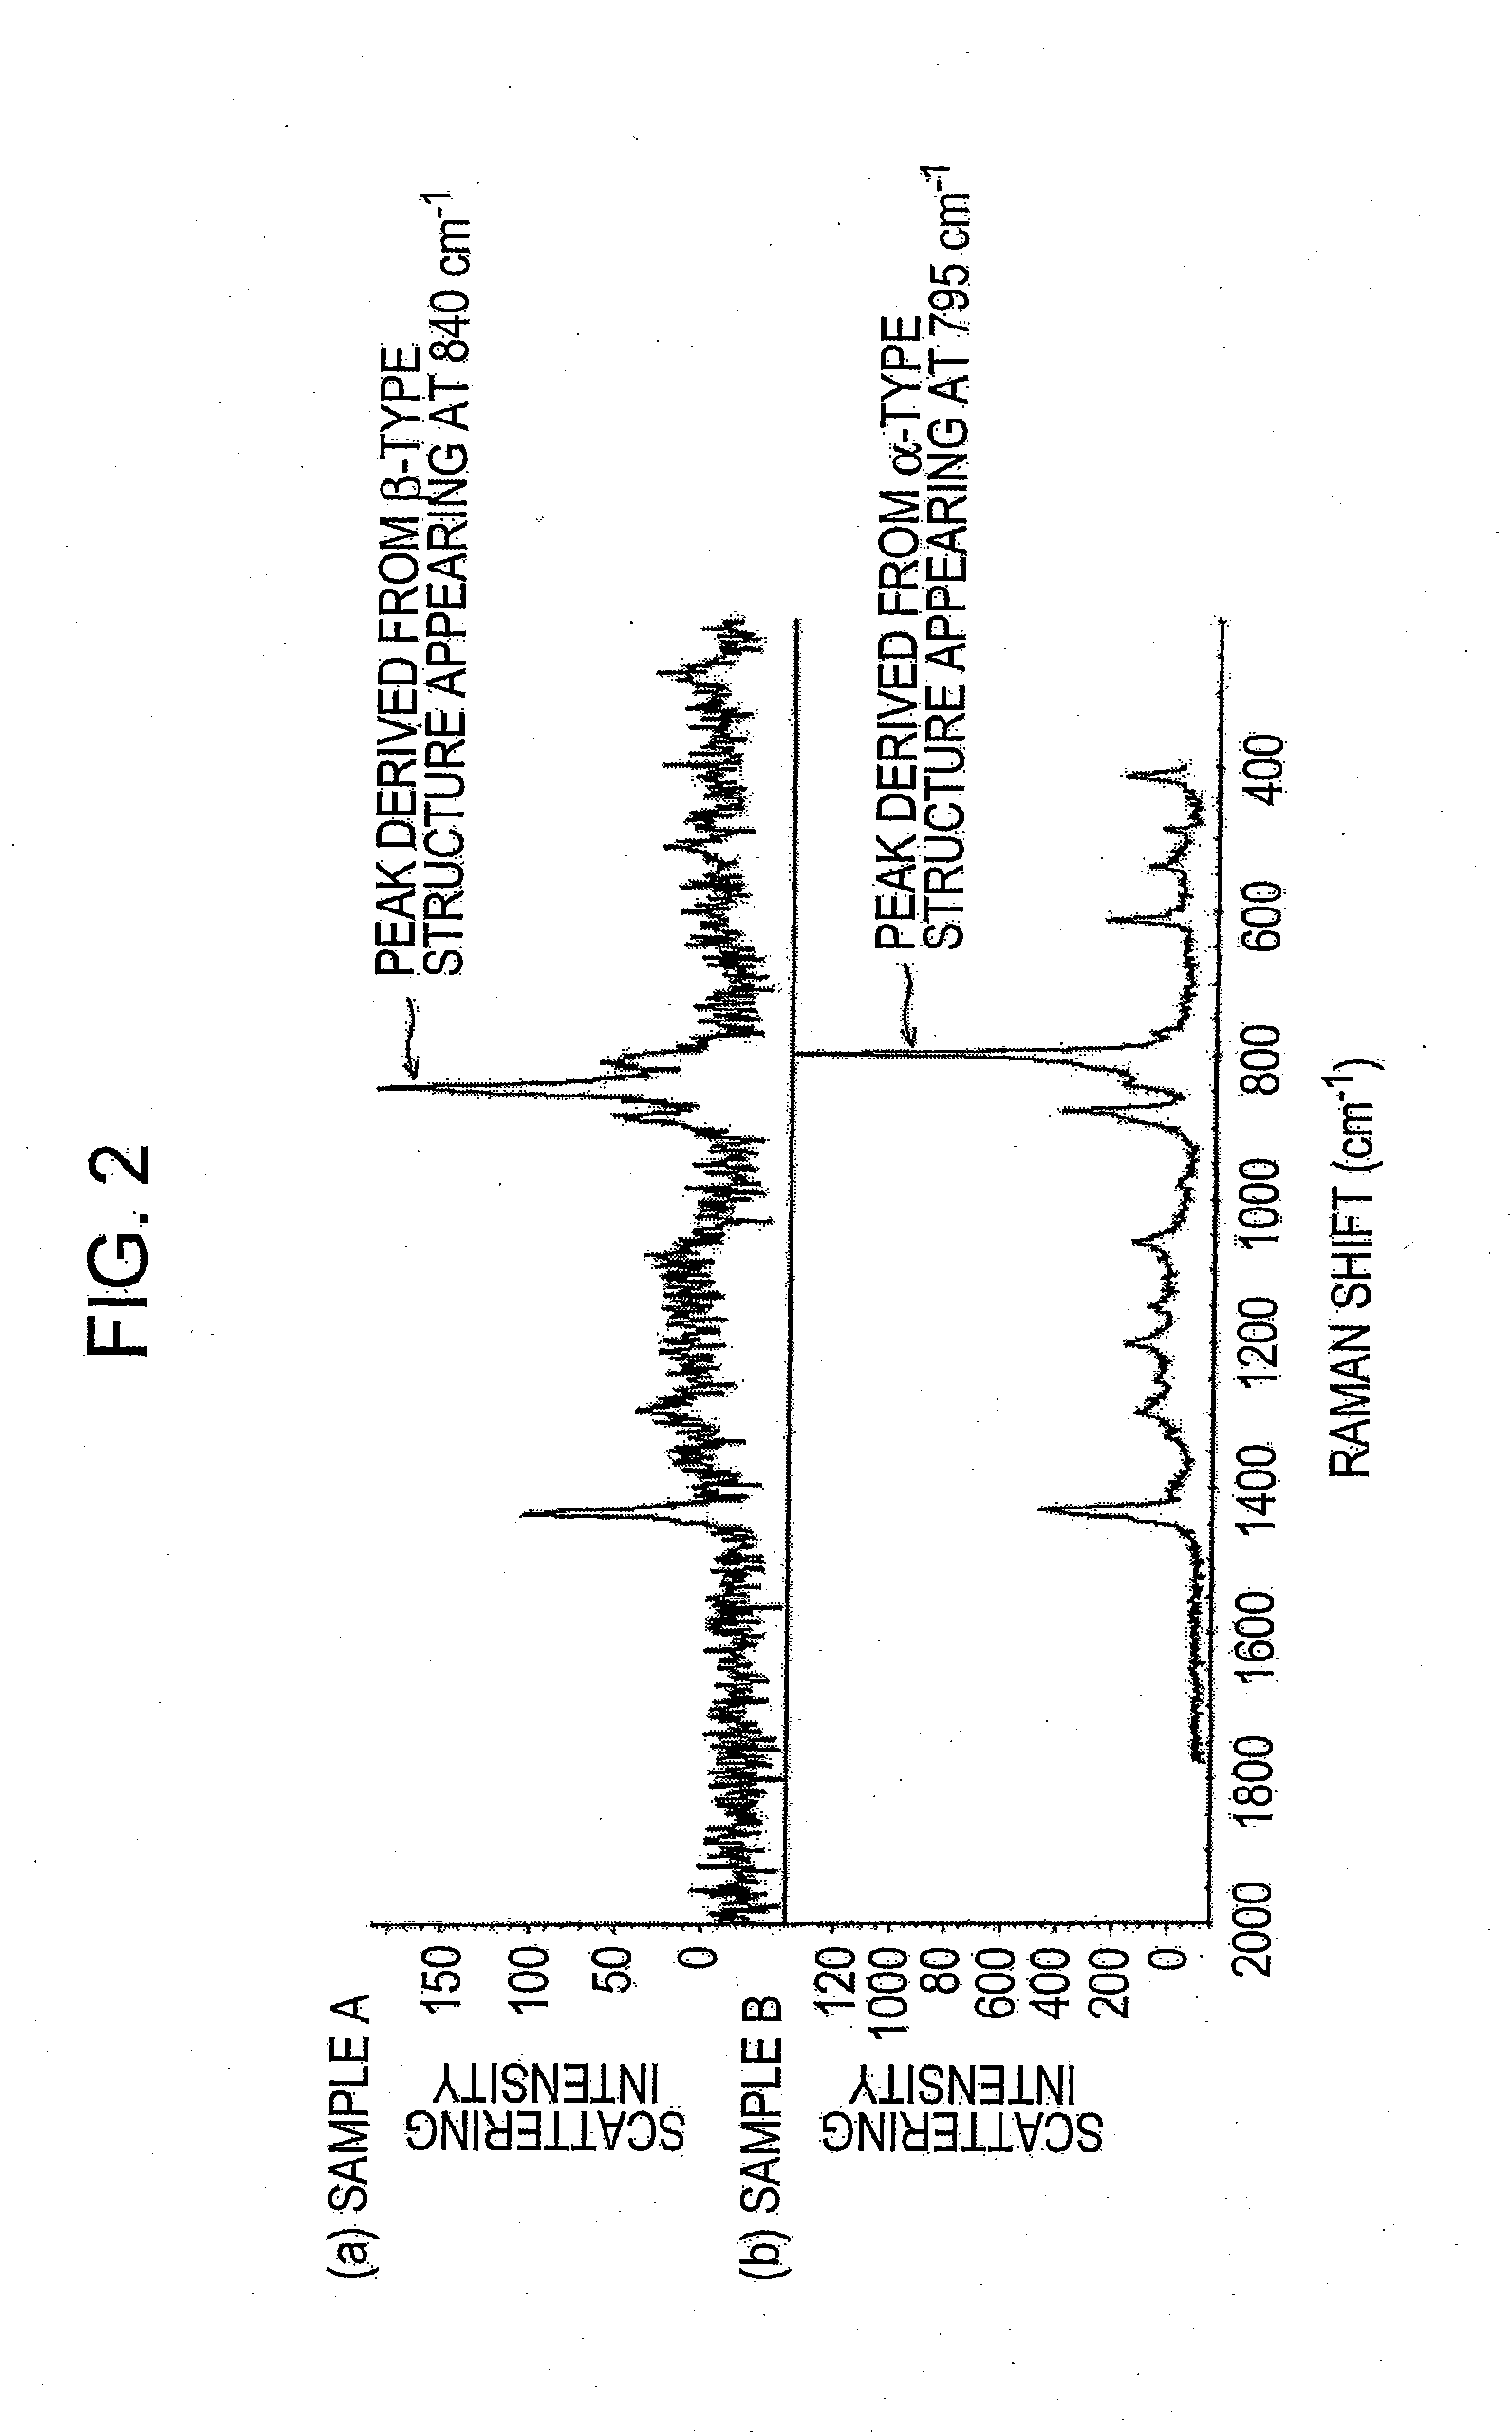 Ion-conductive composite, membrane electrode assembly (MEA), and electrochemical device